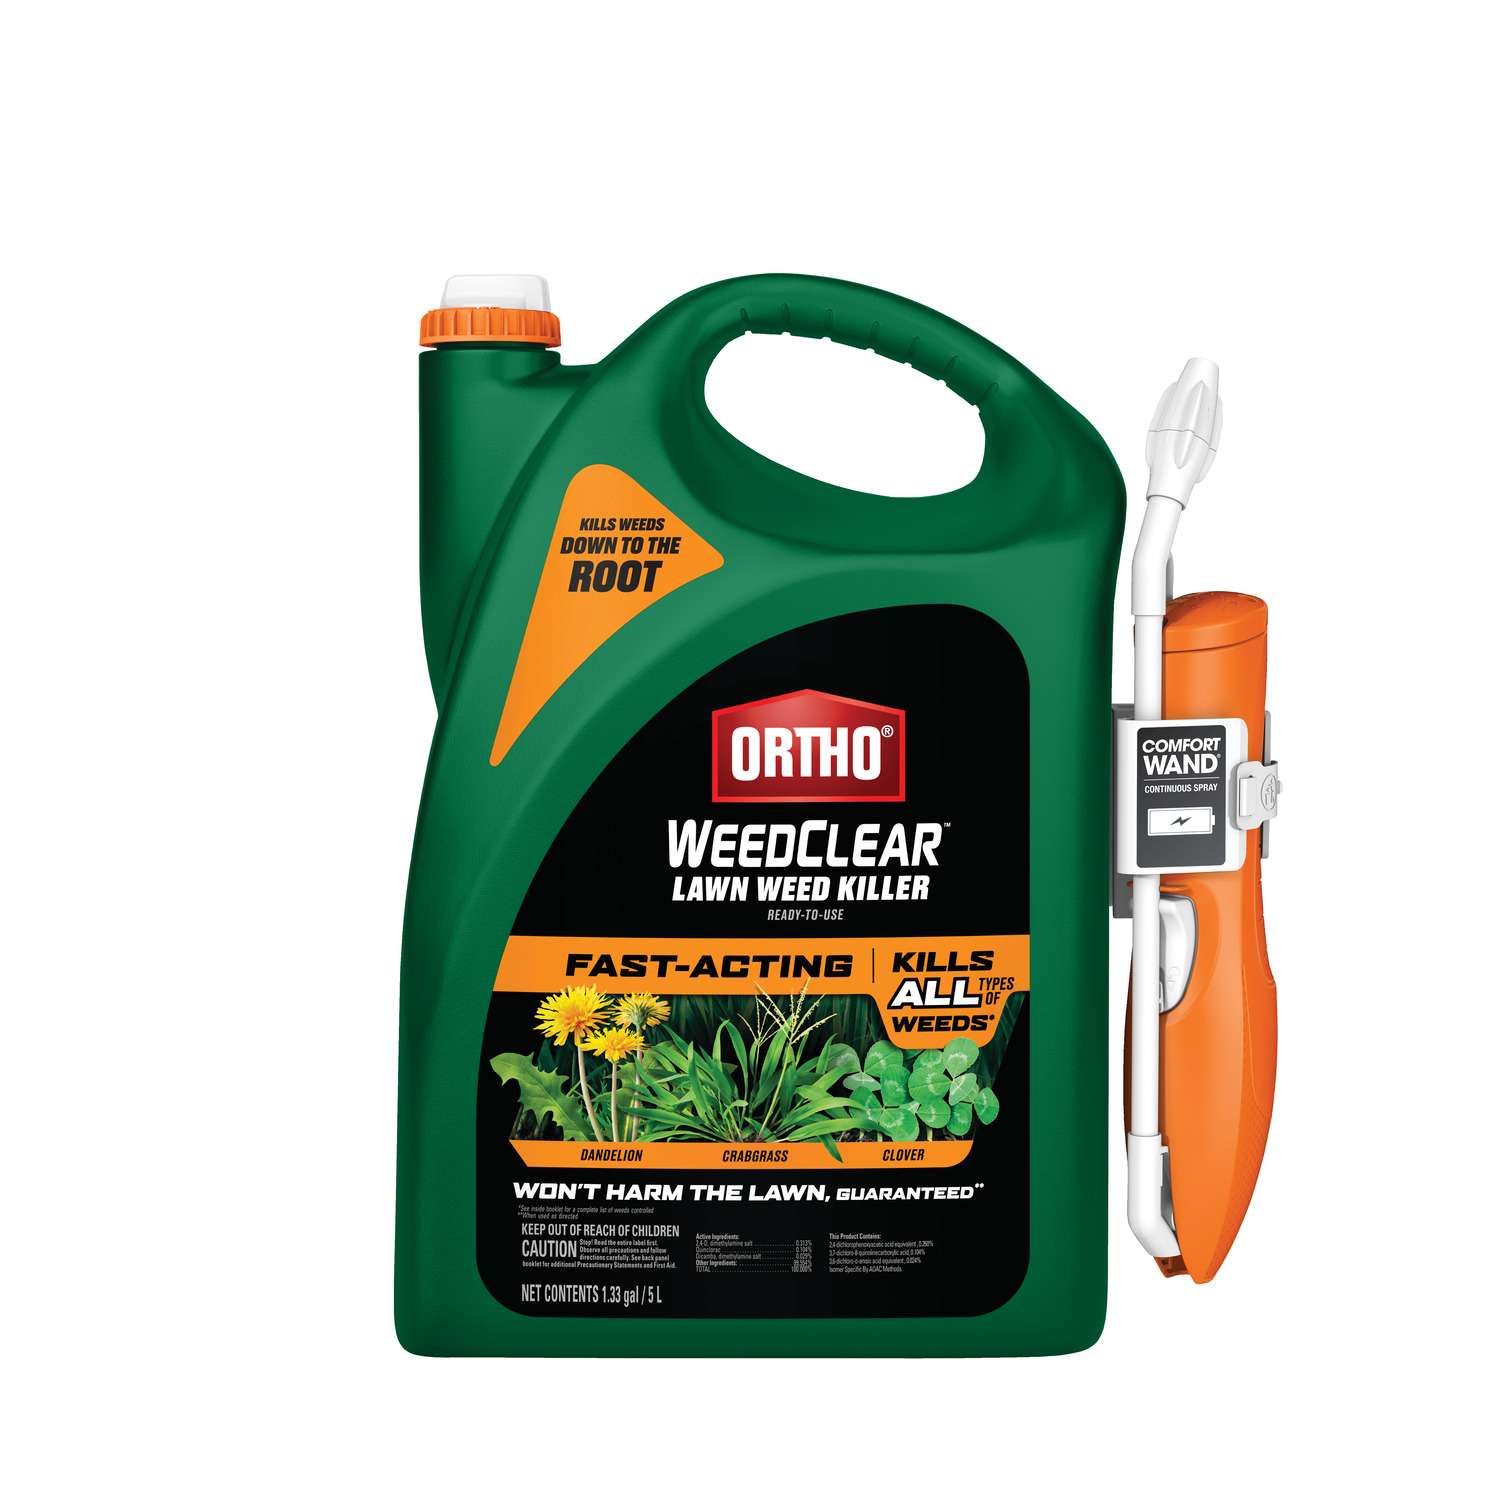 Ortho WeedClear Lawn Weed Killer Ready